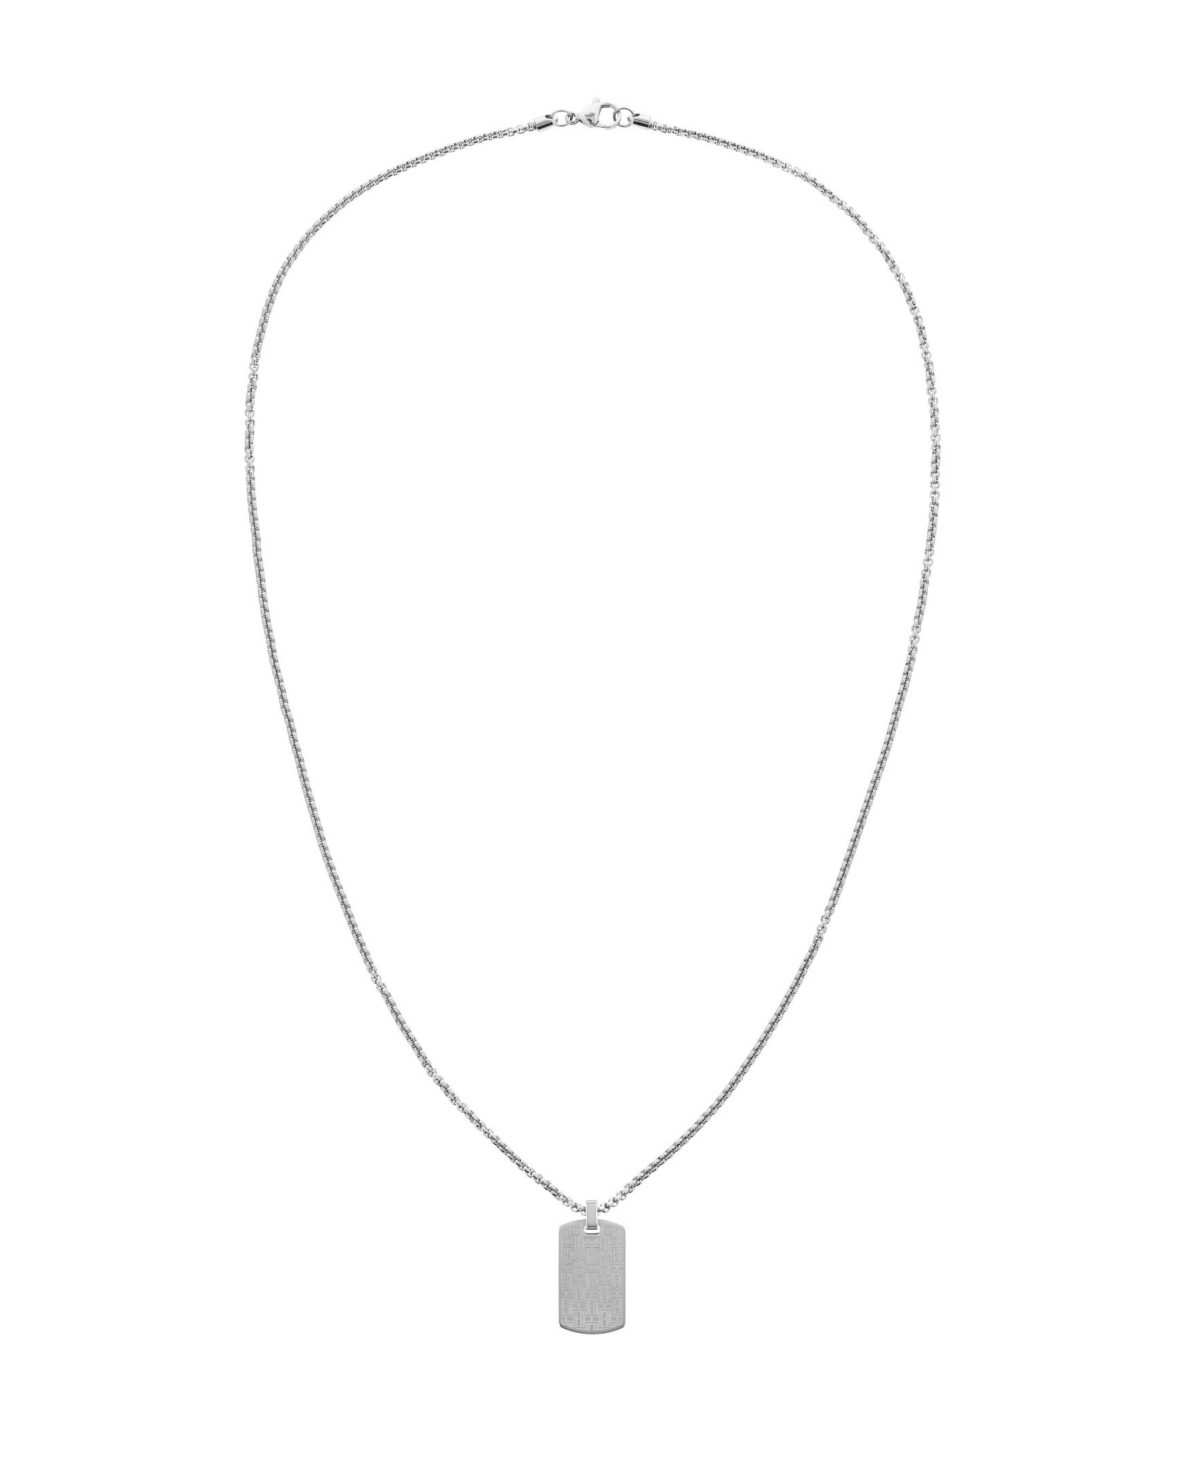 TOMMY HILFIGER MEN'S STAINLESS STEEL CHAIN NECKLACE